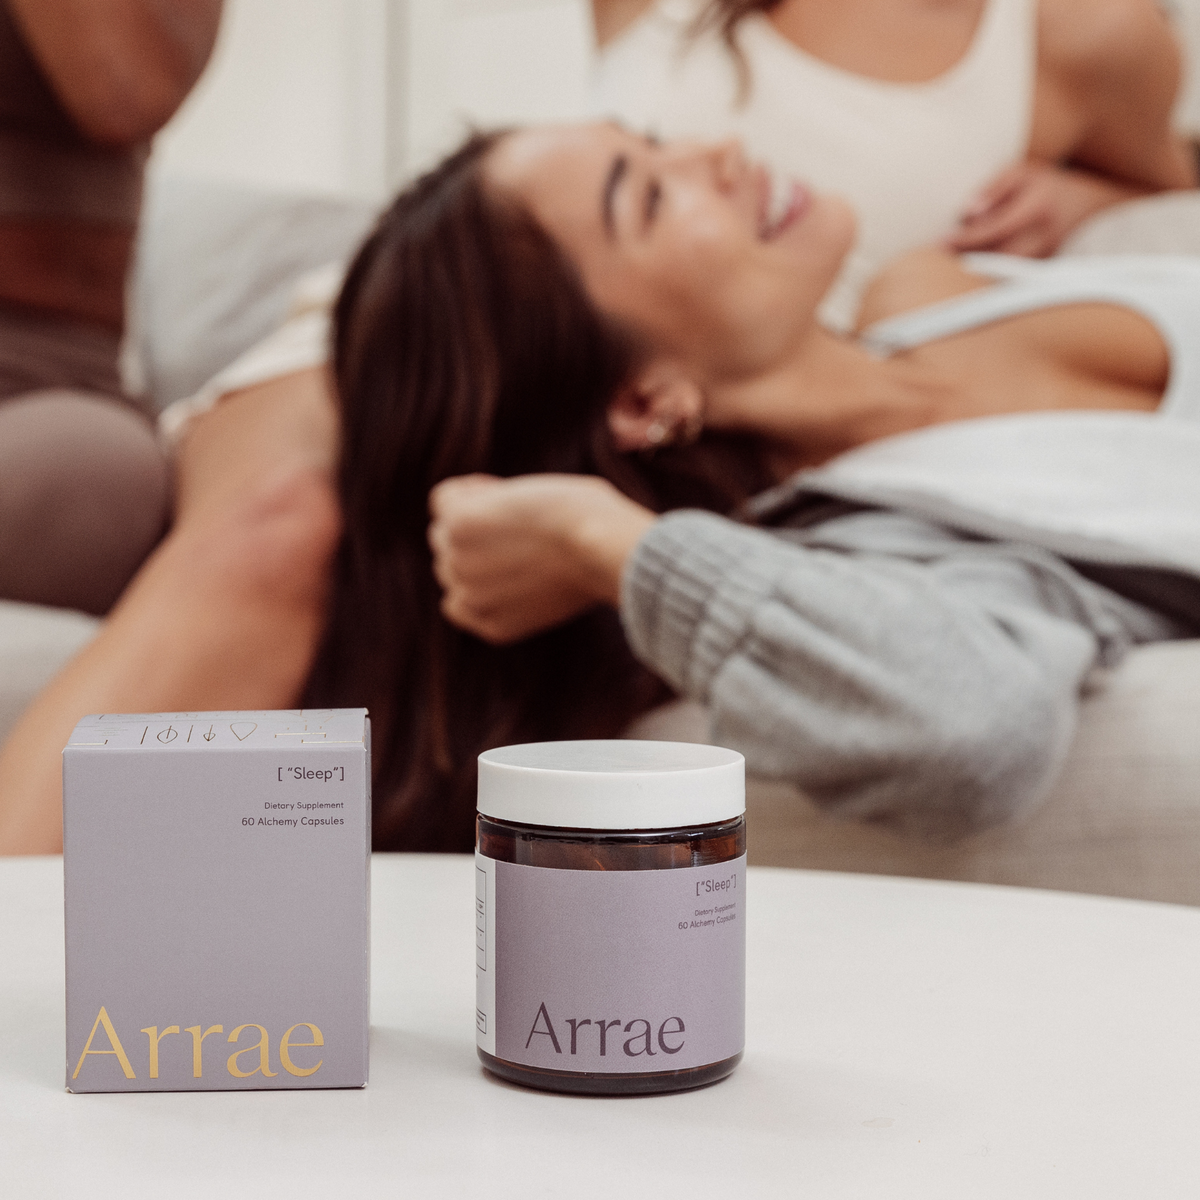 Arrae Sleep Supplement - A jar & bottle of 60 capsules featuring a blend of natural ingredients, designed to promote restful sleep and relaxation without melatonin. 